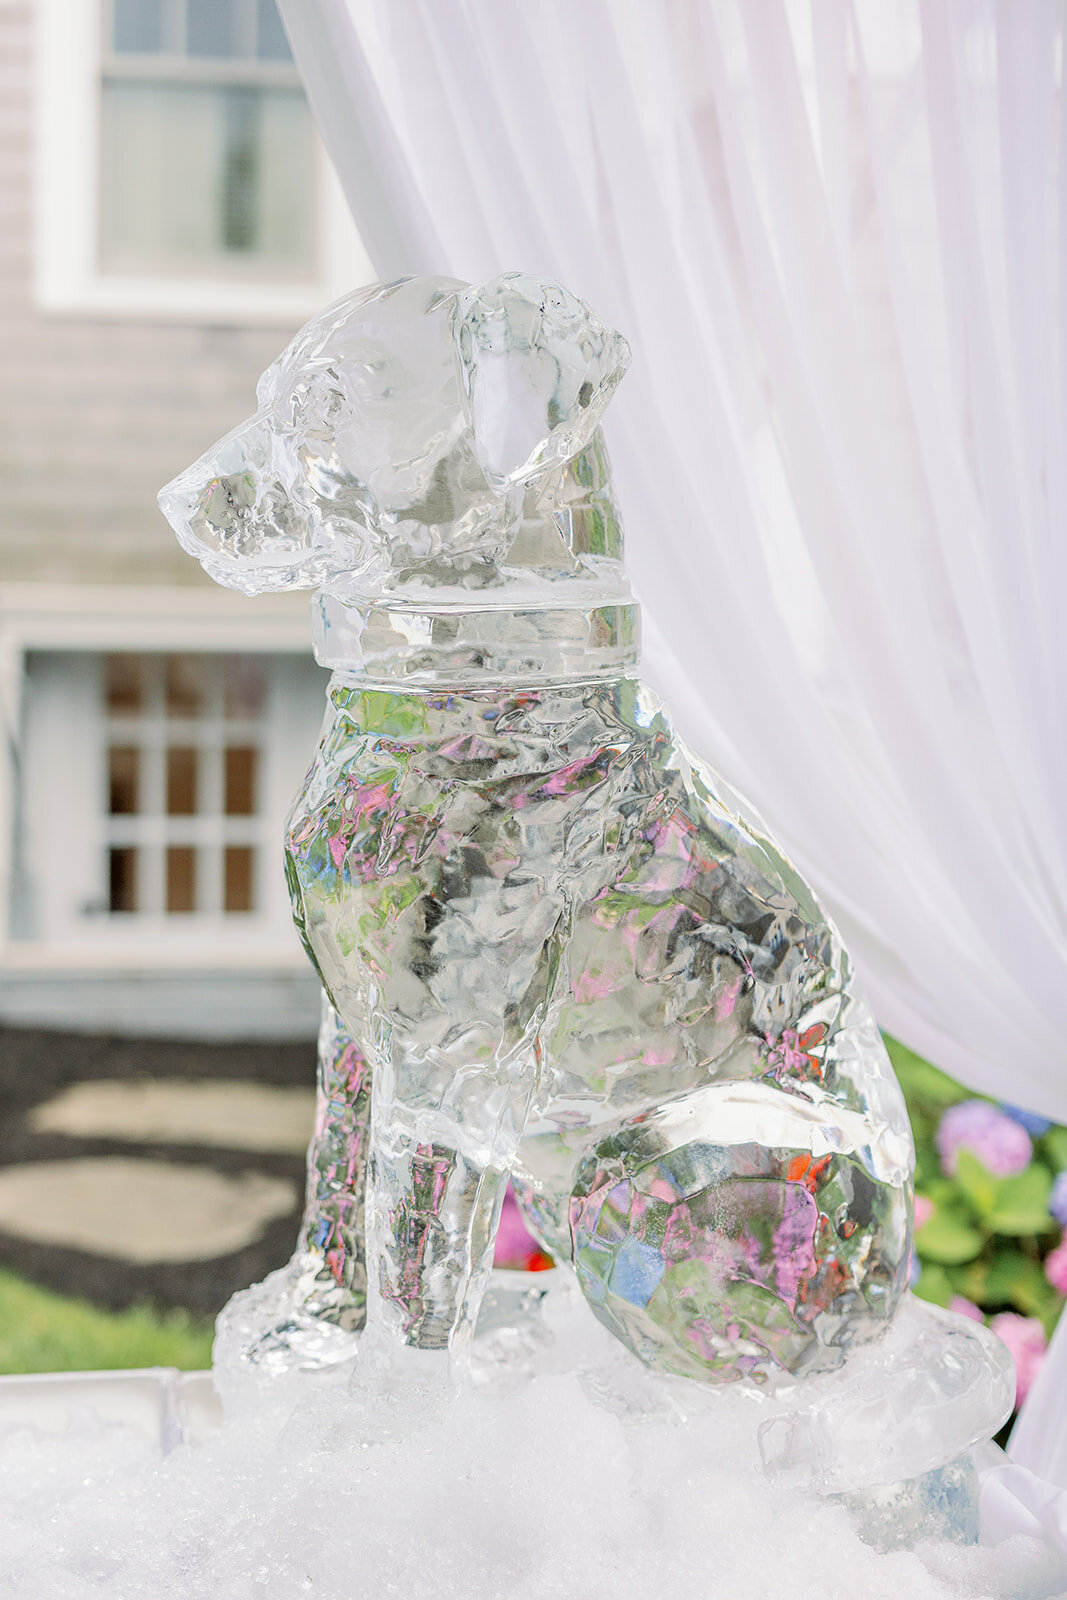 Dog Ice Sculpture at Wedding - Cru and Co